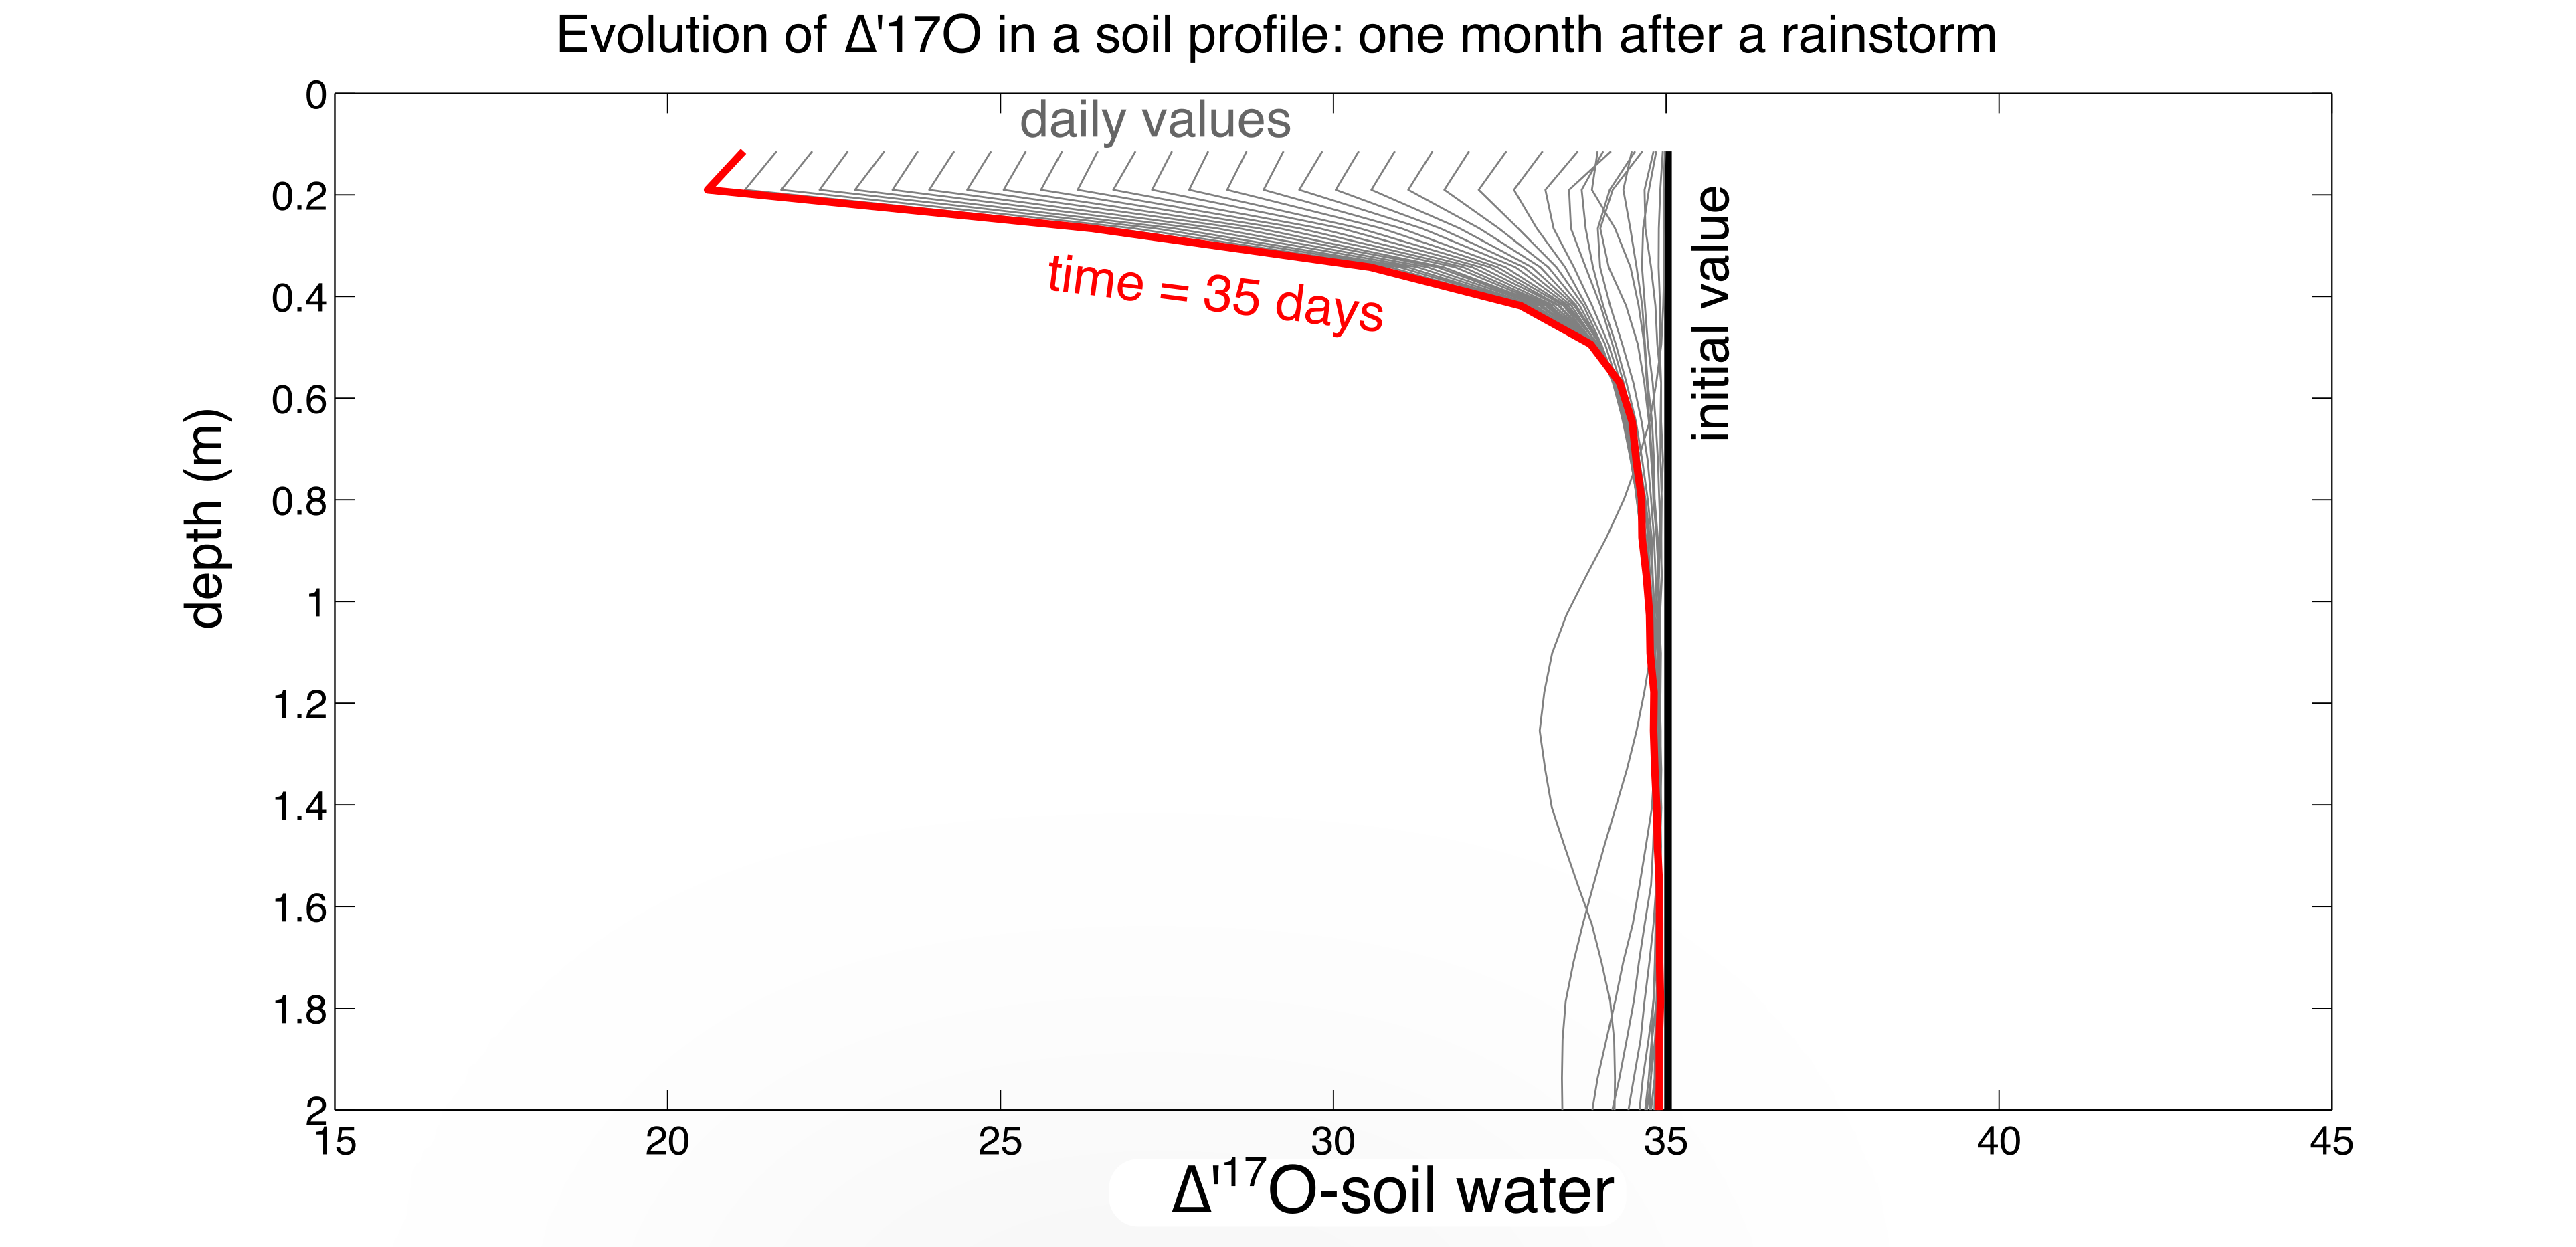 **Figure 5:** Time steps of ∆’<sup>17</sup>O-soil water after the September 10, 2013 rain event at Adam’s Ranch, New Mexico. The ∆’<sup>17</sup>O of soil water resets to the rainfall value (+35 per meg) after a storm, then evolves to lower ∆’<sup>17</sup>O with drying; the plot stops at 35 days, just before the next rain event. Soil profile is held at 15 °C, atmosphere at 12.5 °C. 